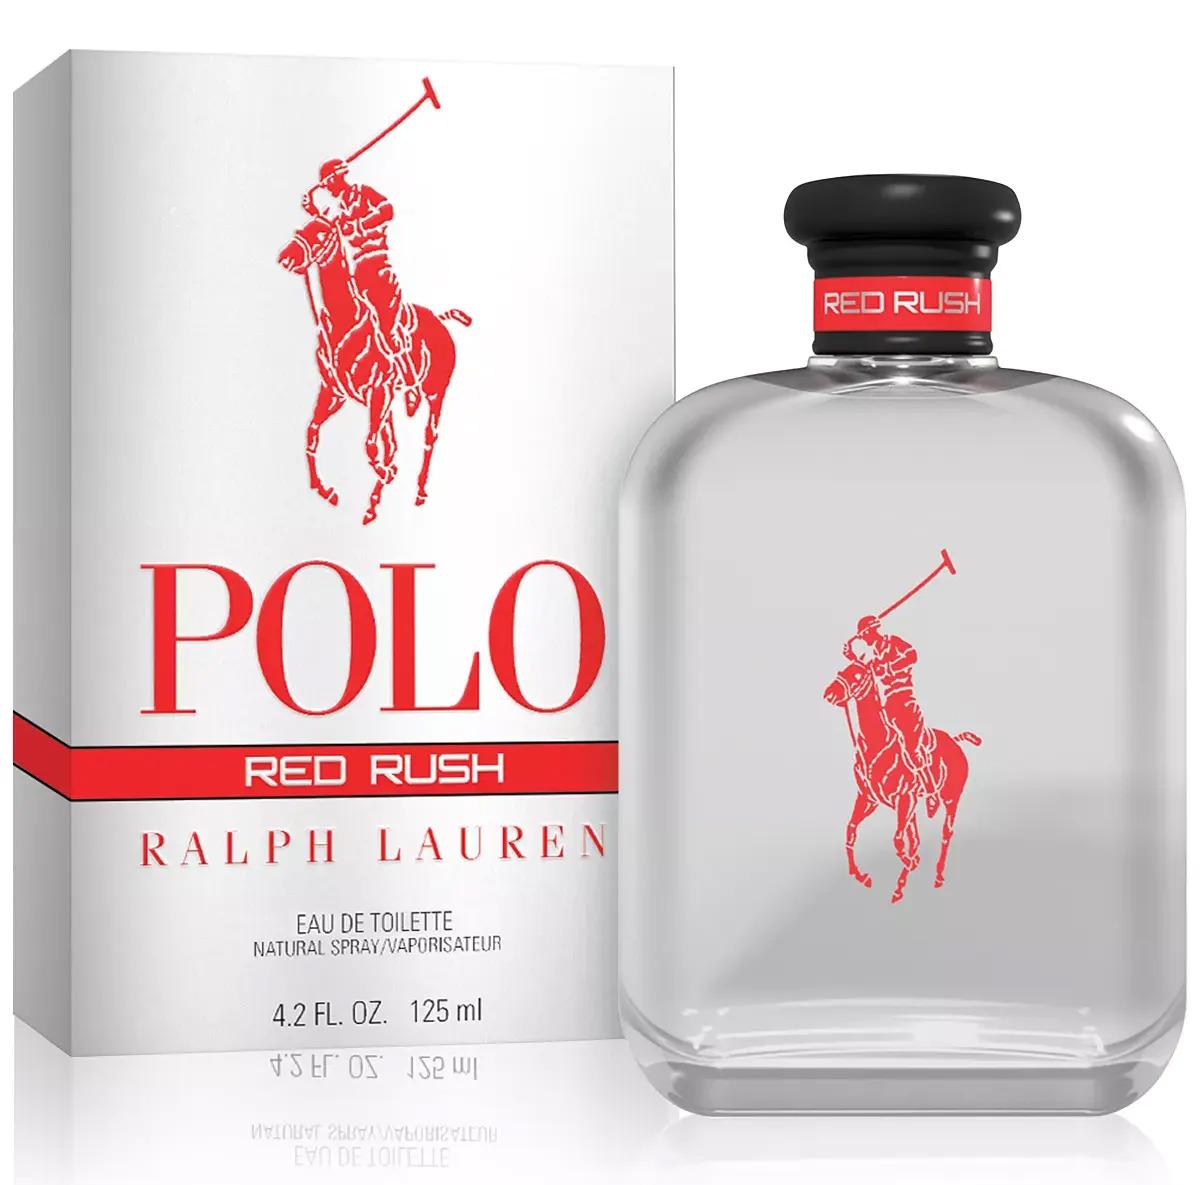 Ralph Lauren Mens Polo Red Rush EDT Spray with Duffle Bag for $45 Shipped